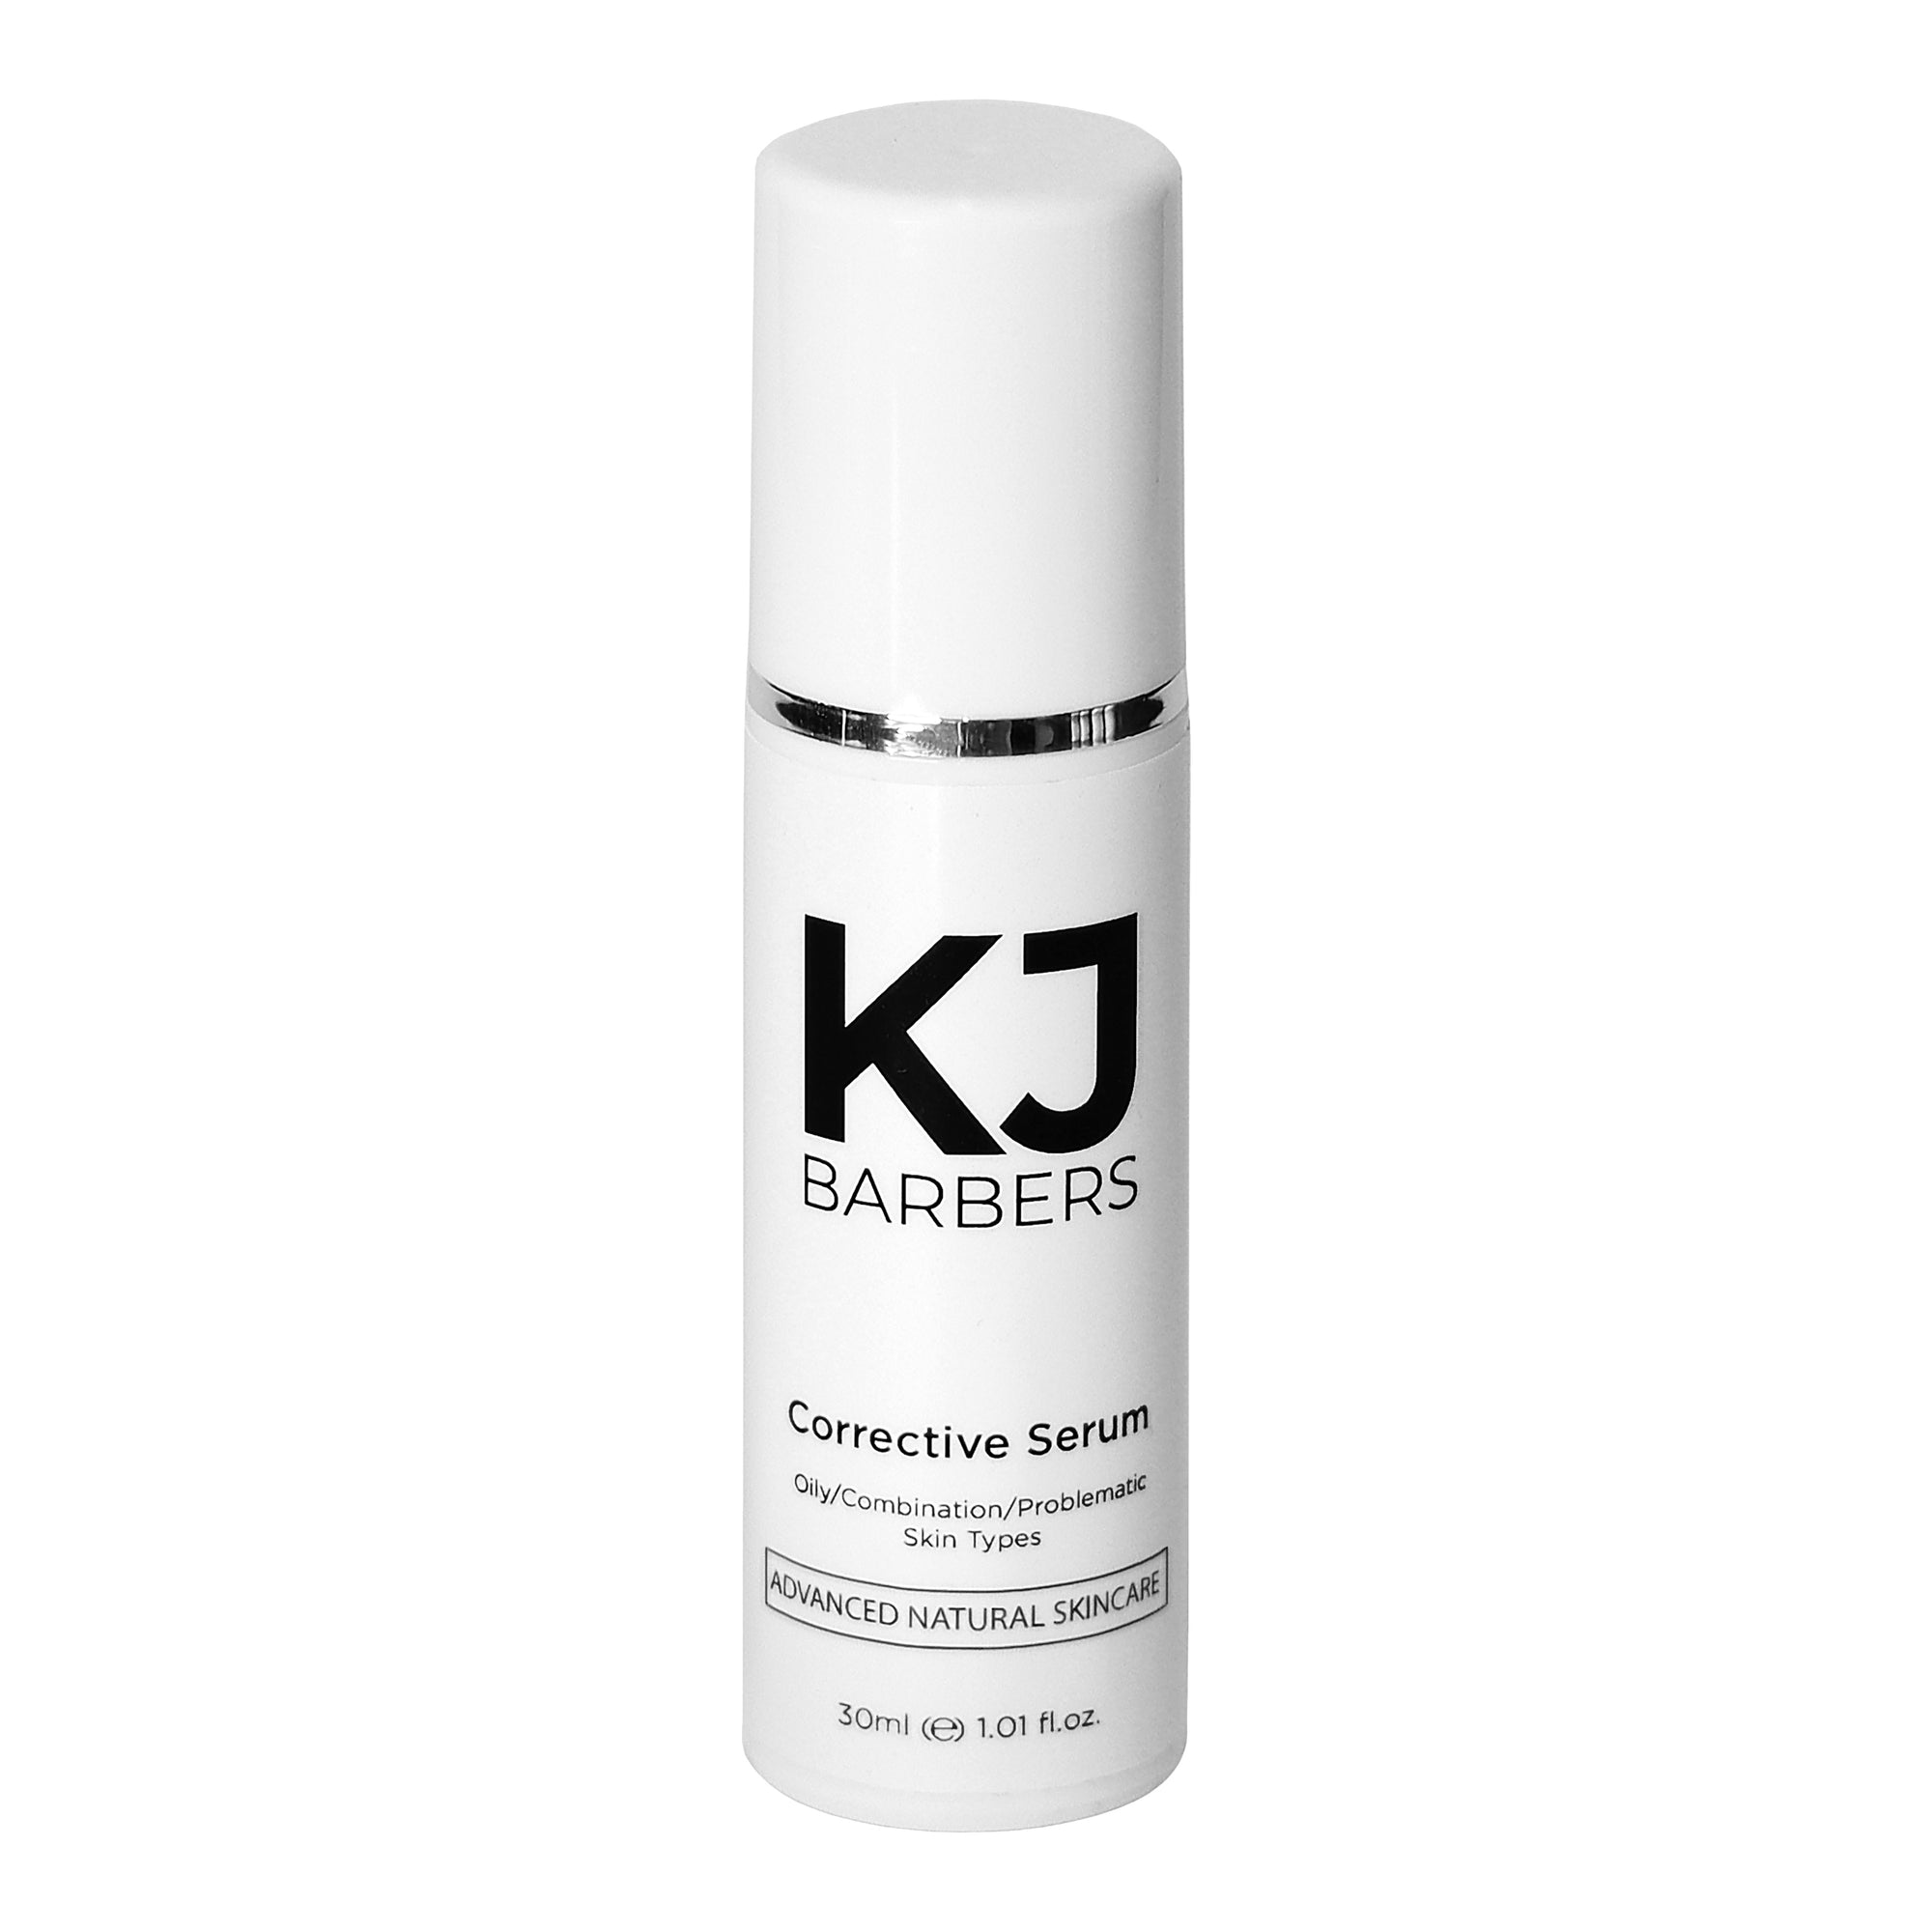 KJ Barbers Corrective Serum uses vitamins, hyaluronic acid and oils to smooth out fine lines and wrinkles and improve skin tone.